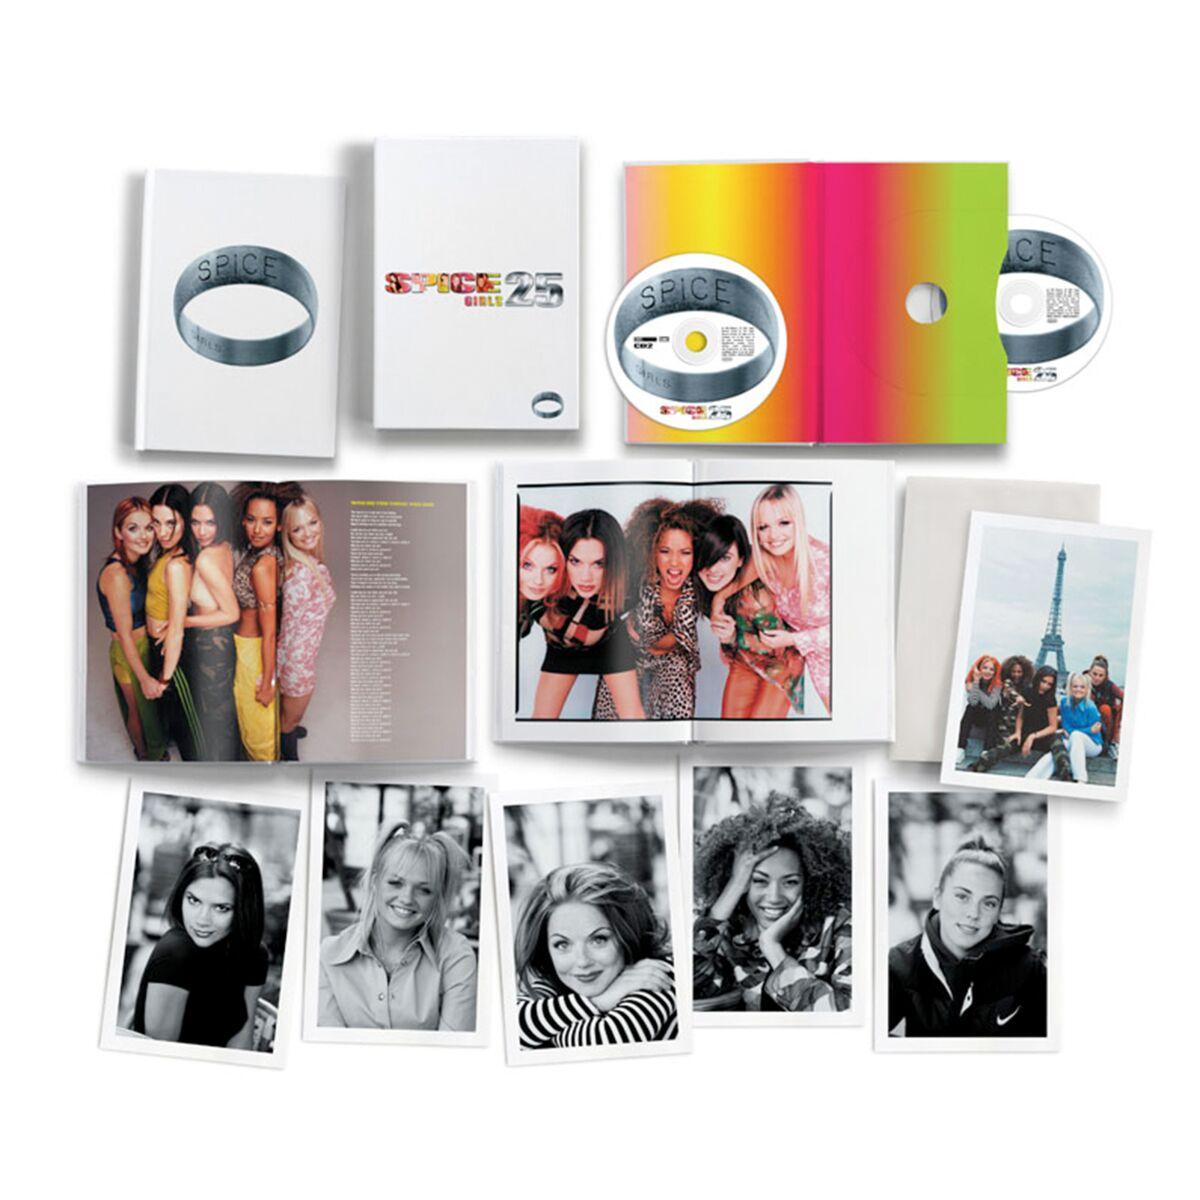 Spice Girls Spice (Deluxe Edition) (фирм.)